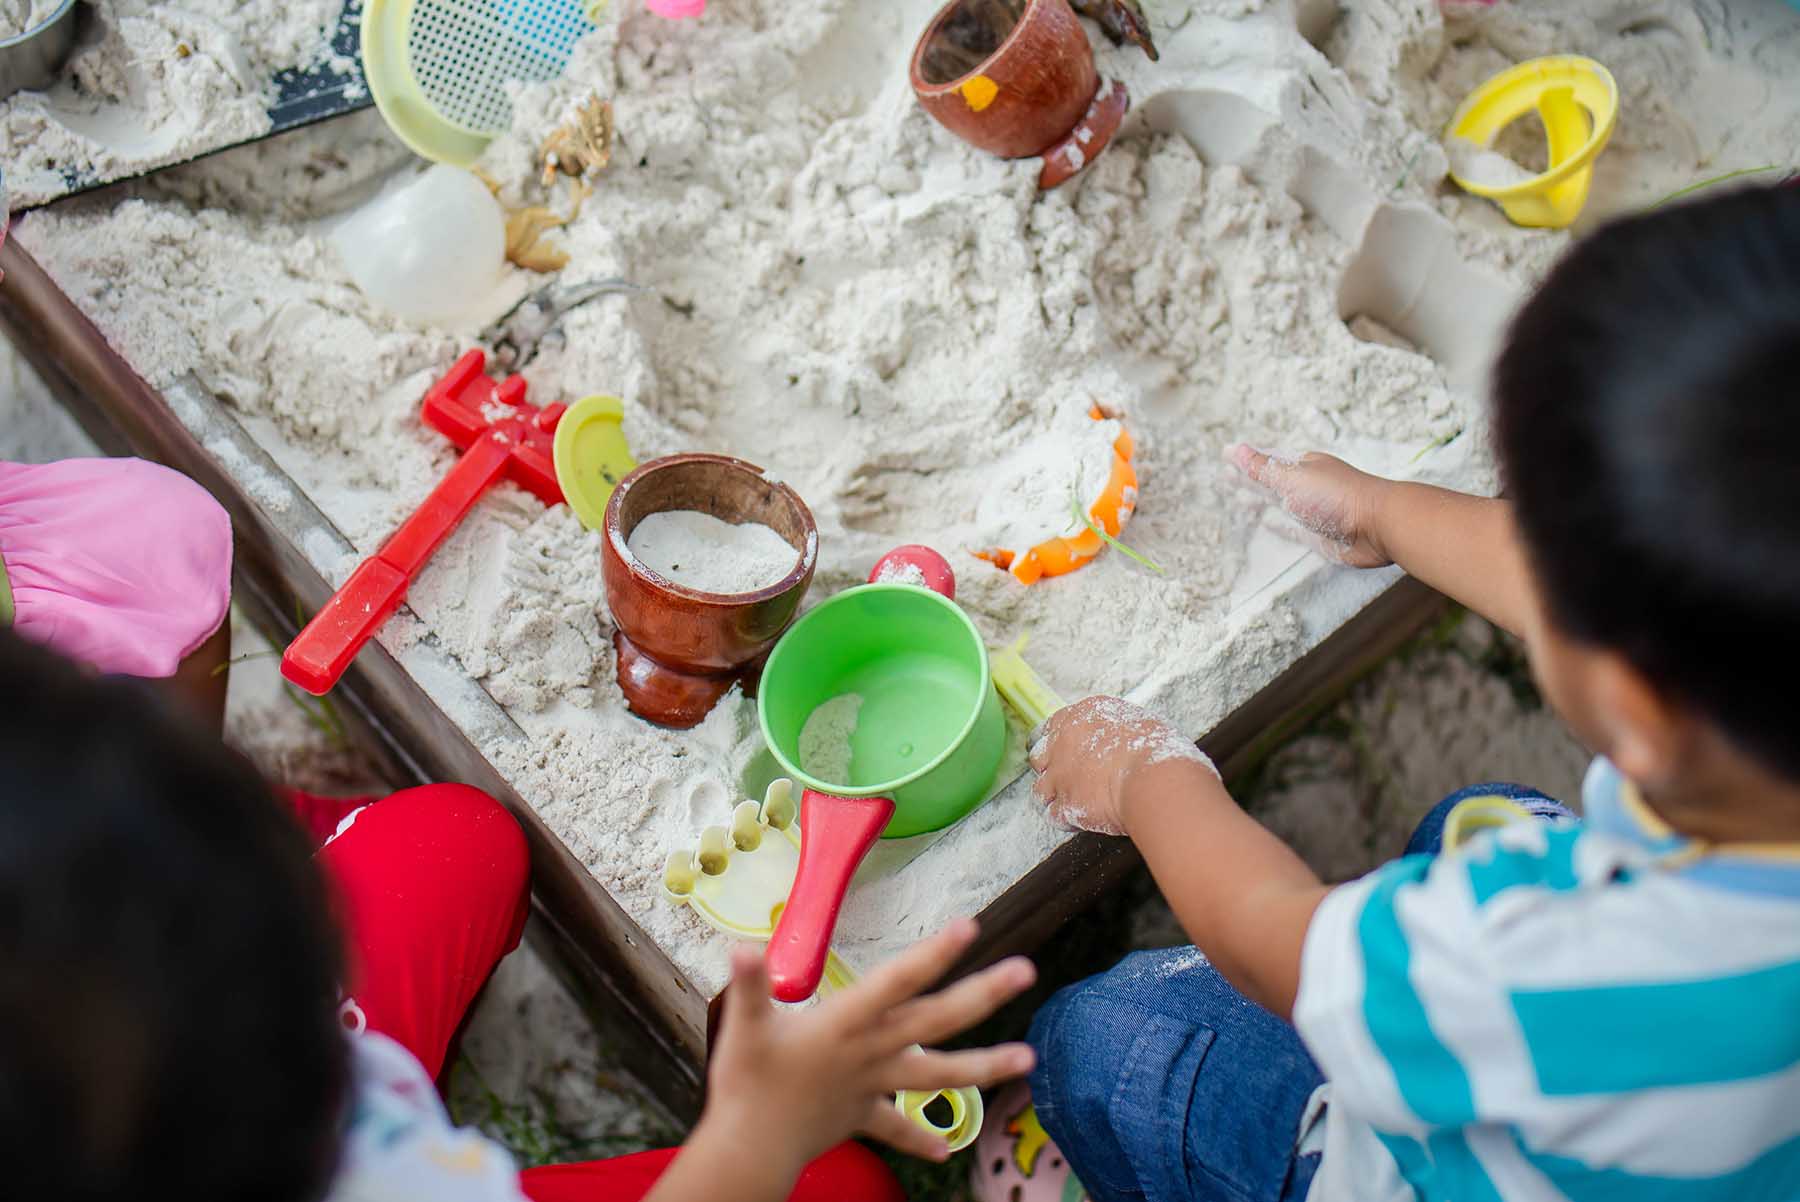 Children playing in a sandbox with a variety of tools